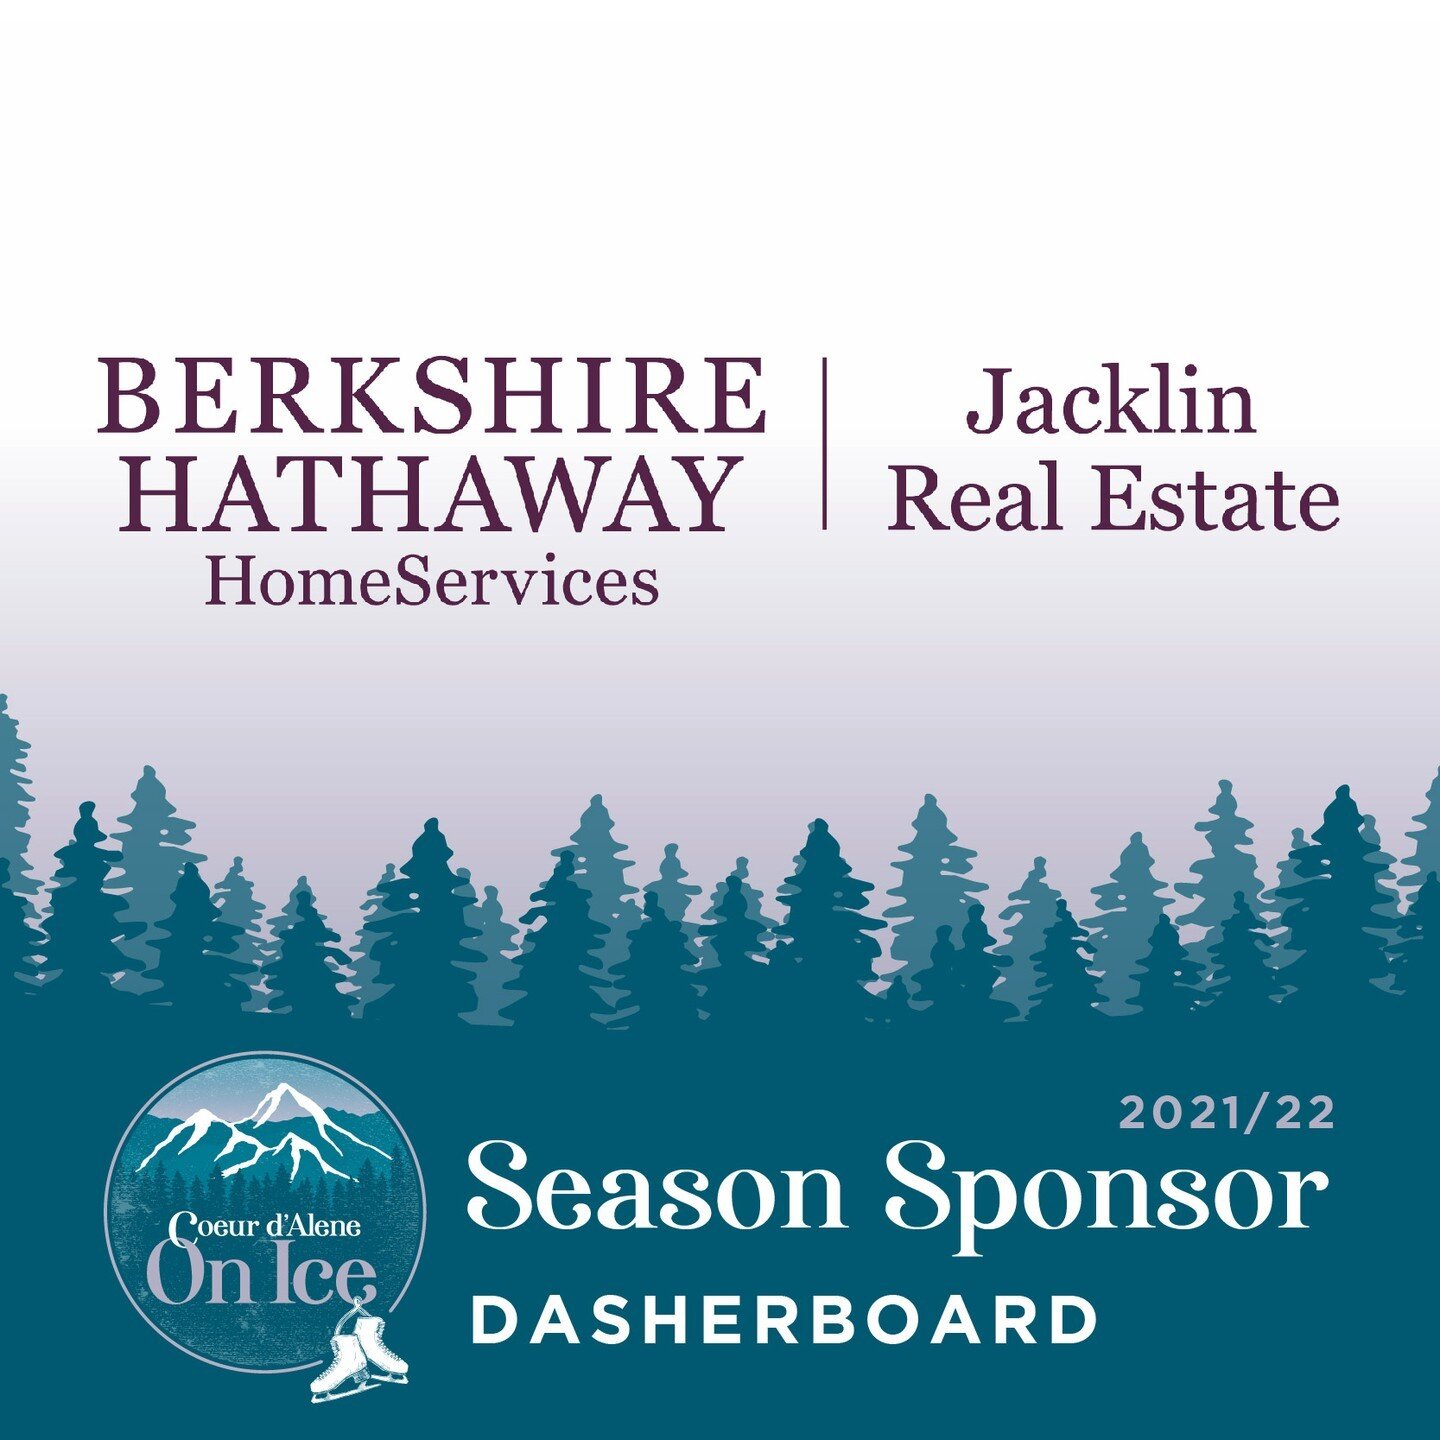 Thank you to Berkshire Hathaway Home Services for joining us as a rink Dasherboard Sponsor! Their fun, knowledgeable team is ready to assist you with your real estate needs! ❄️⛸ 

Thanks to each of our sponsors for investing in our community! 
. 
.
.